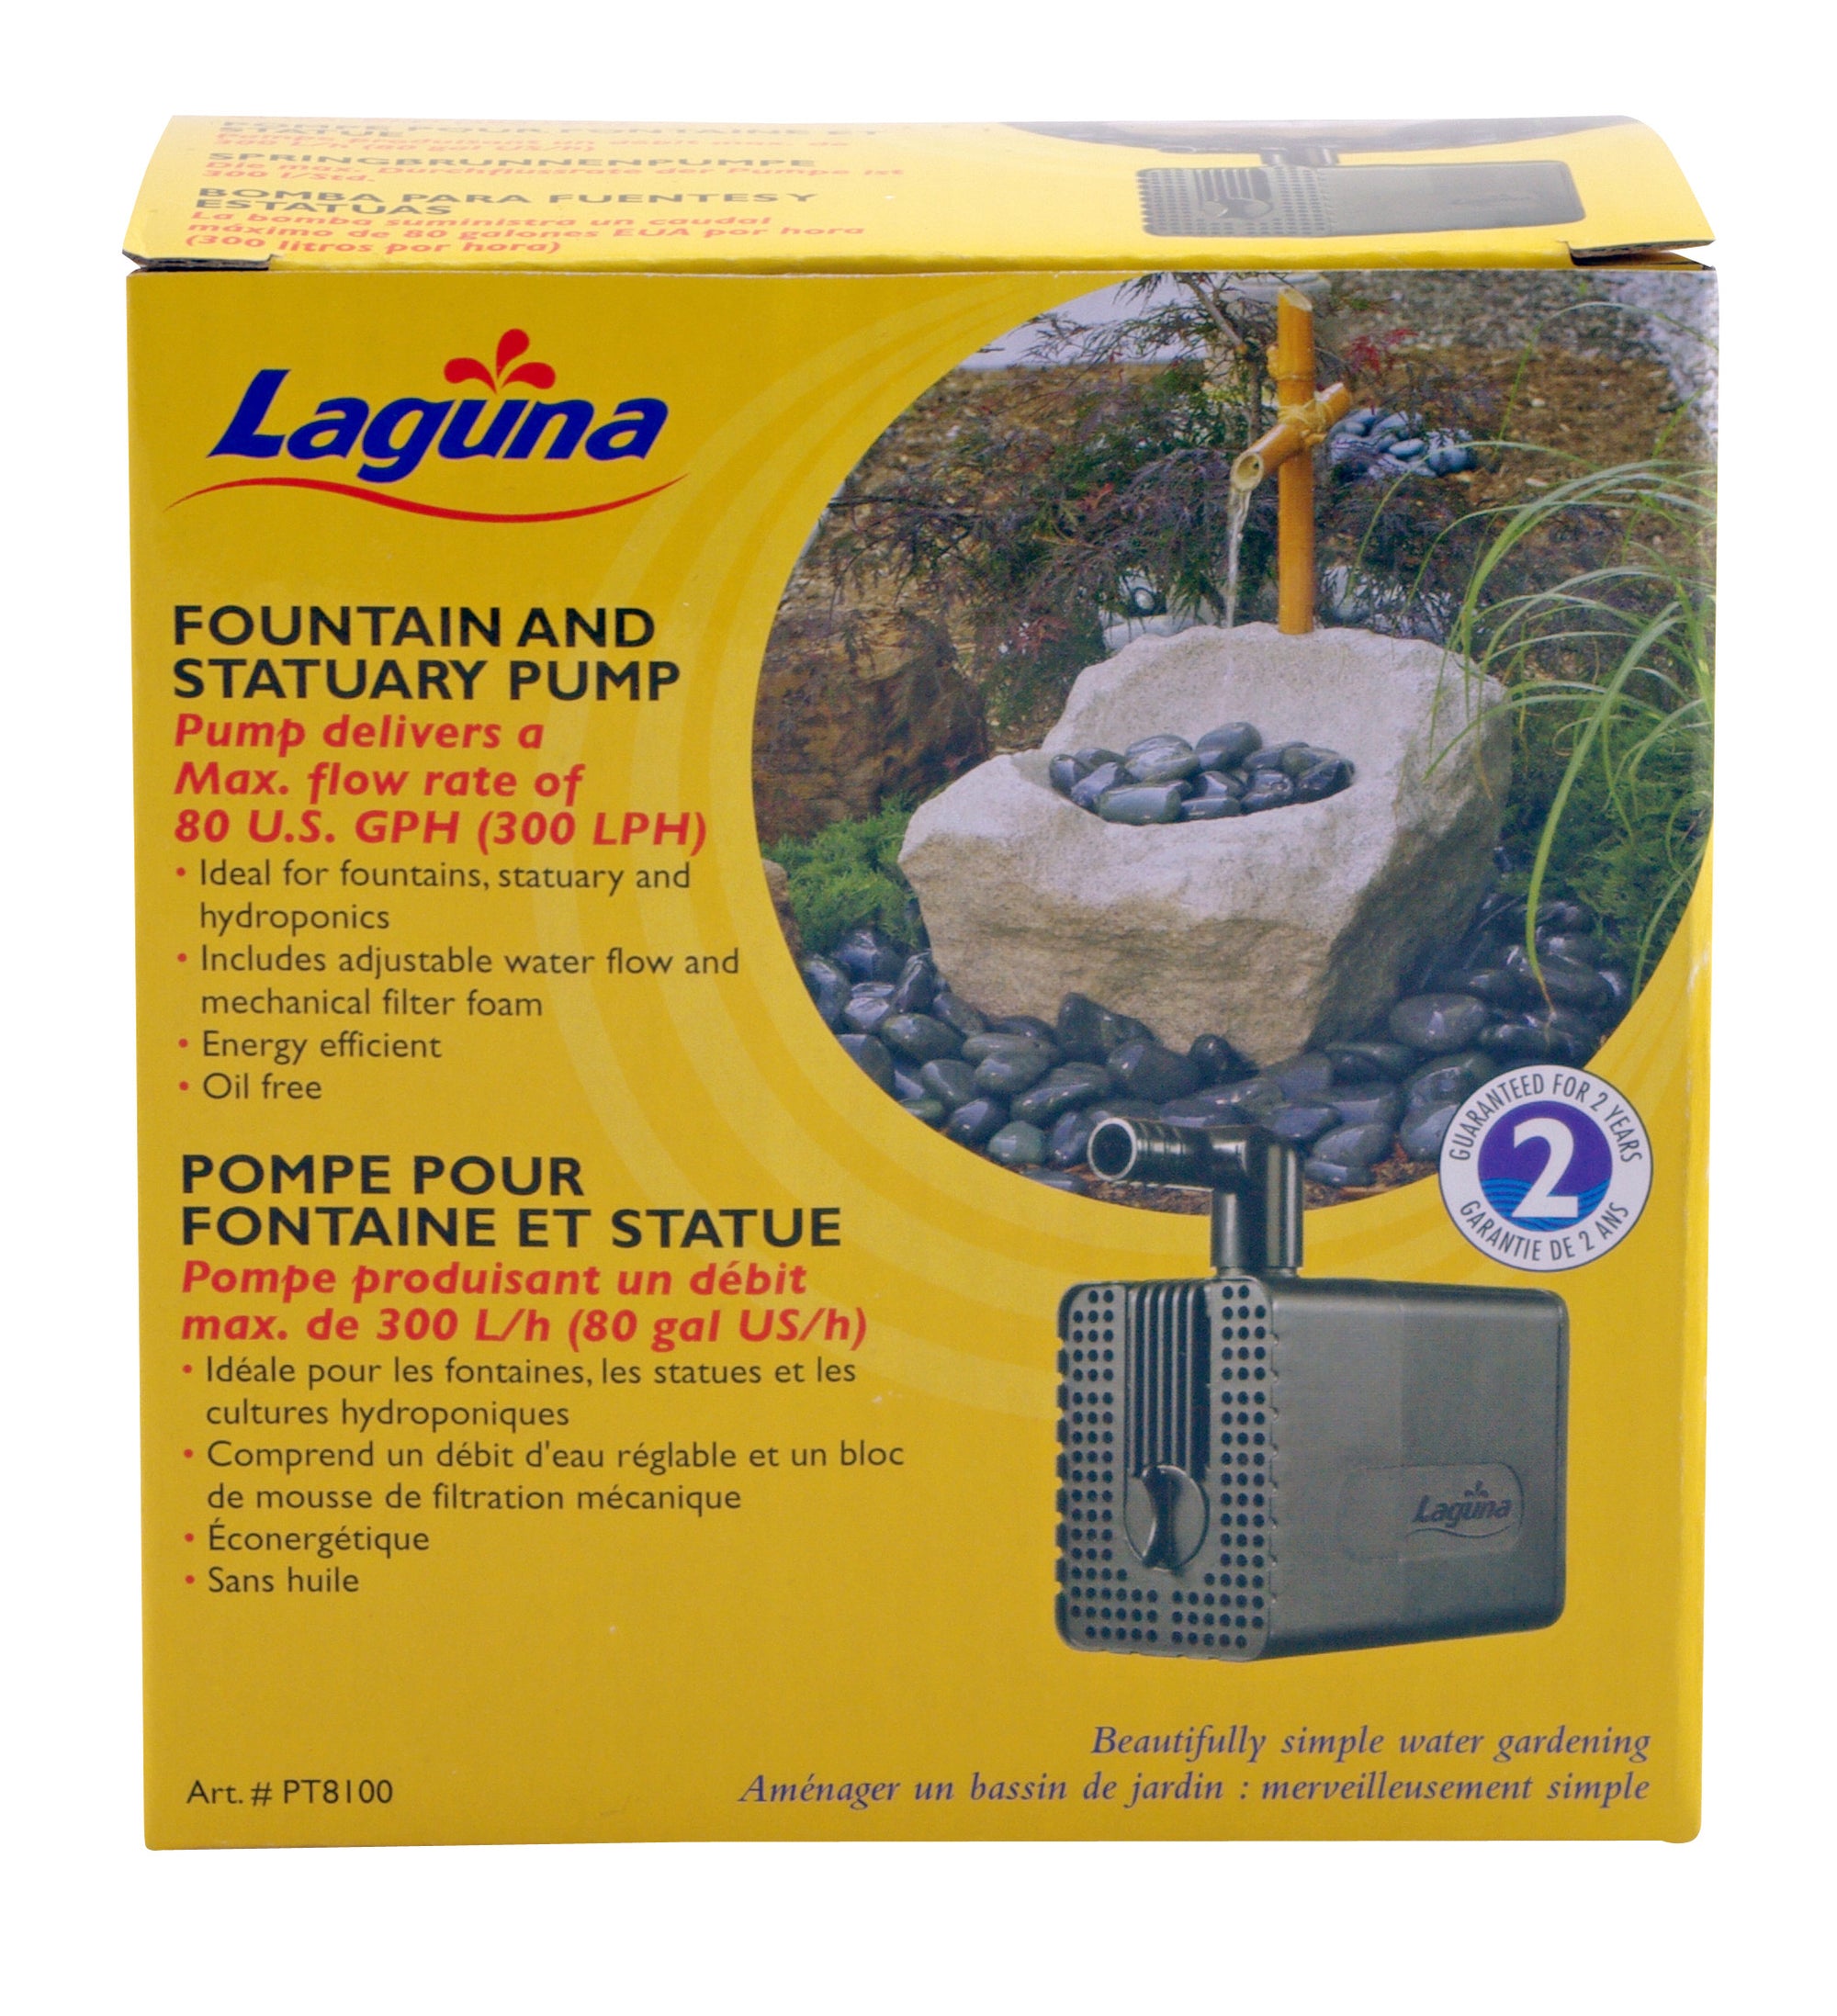 Laguna submersible water pump, for use in fountains, statuary and hydroponics.